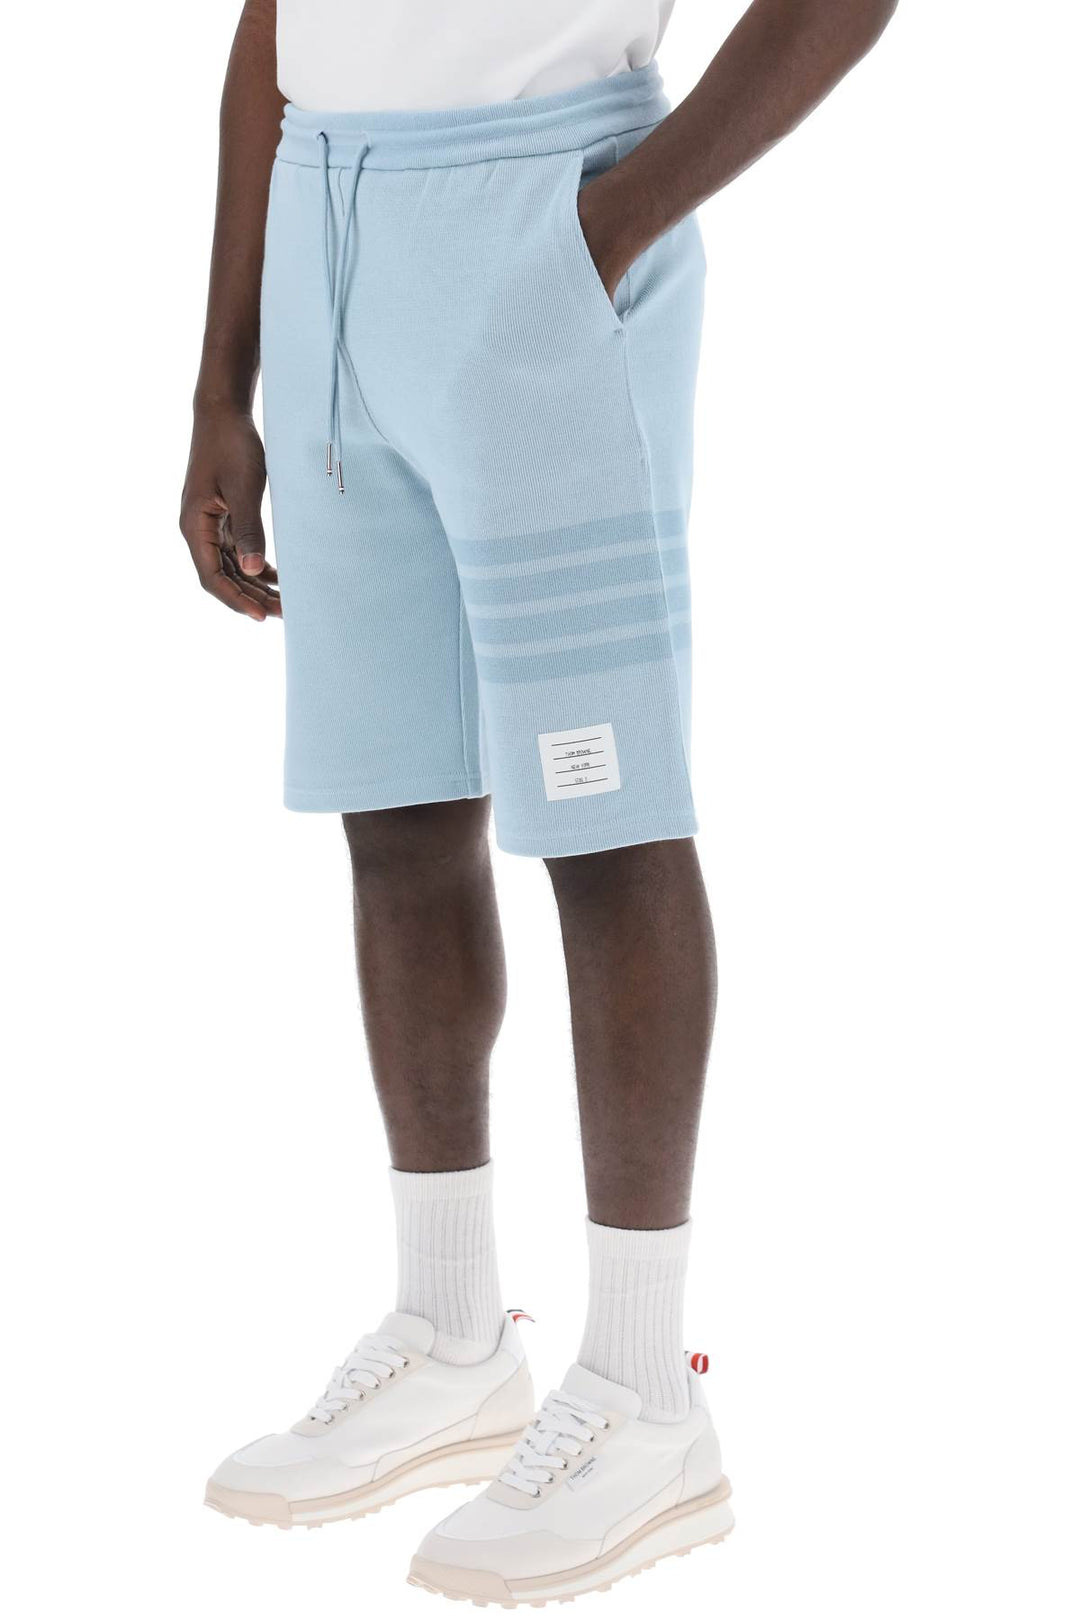 Thom Browne 4 Bar Shorts In Cotton Knit   Celeste